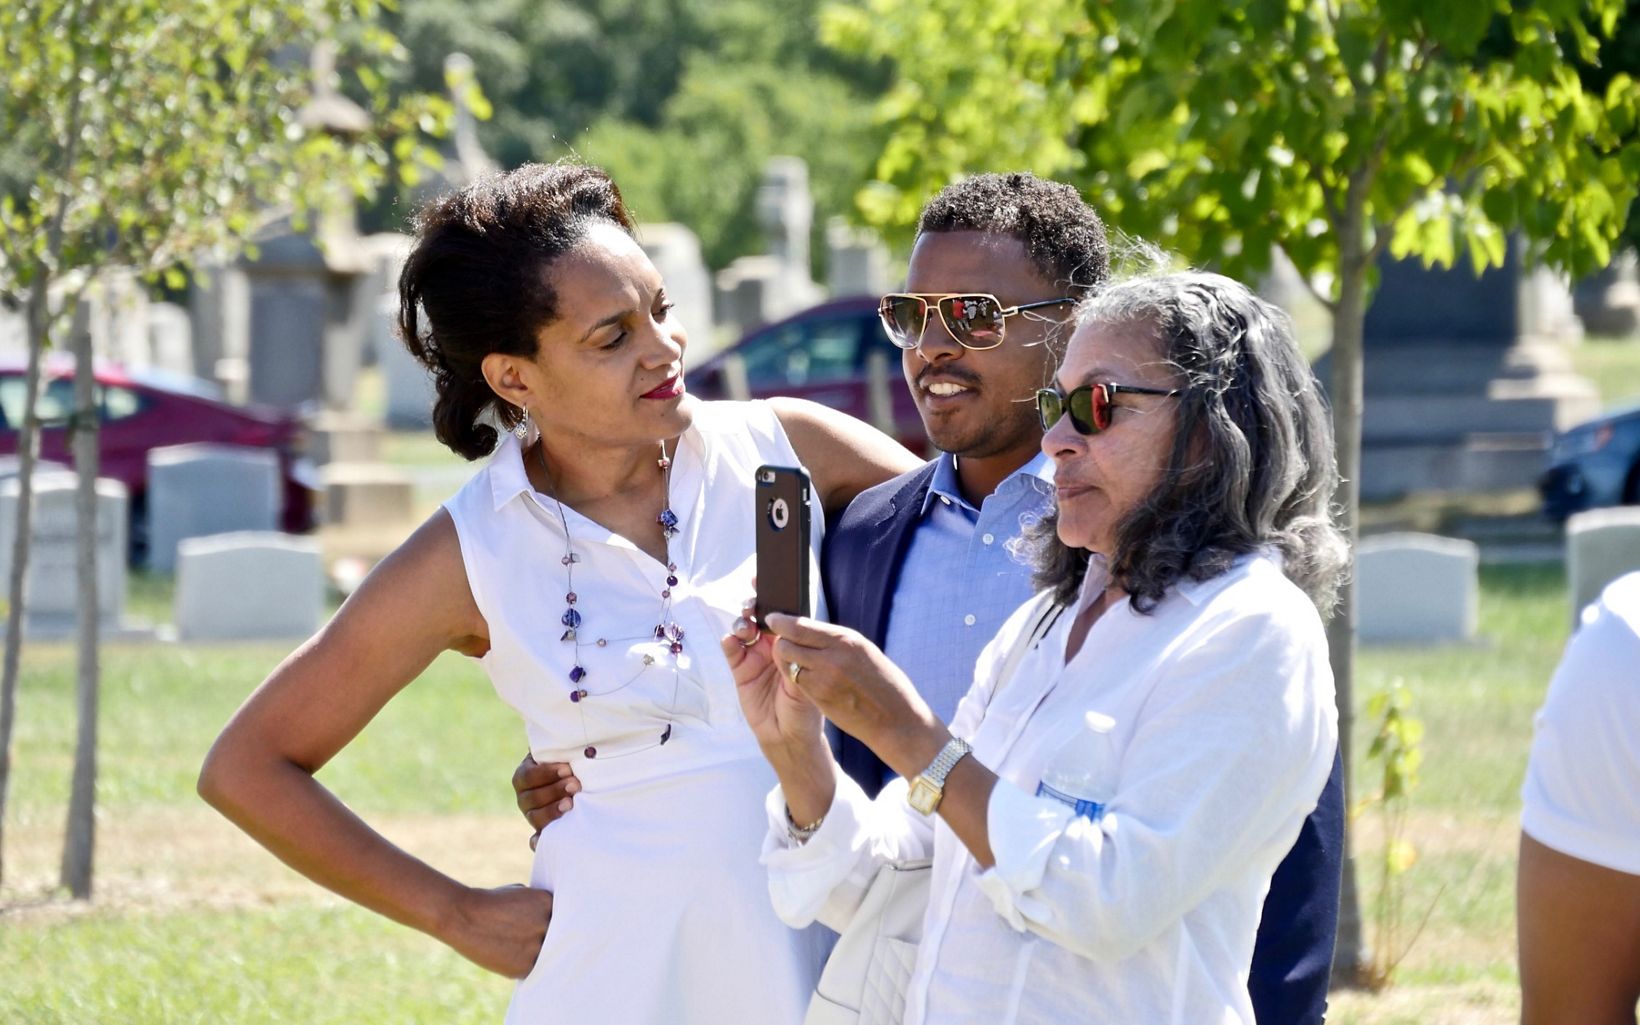 Event organizer Gayle George (l) with extended family members during a celebration of ancestors John and Arabella Weems, freedmen buried at Mt. Olivet Cemetery.